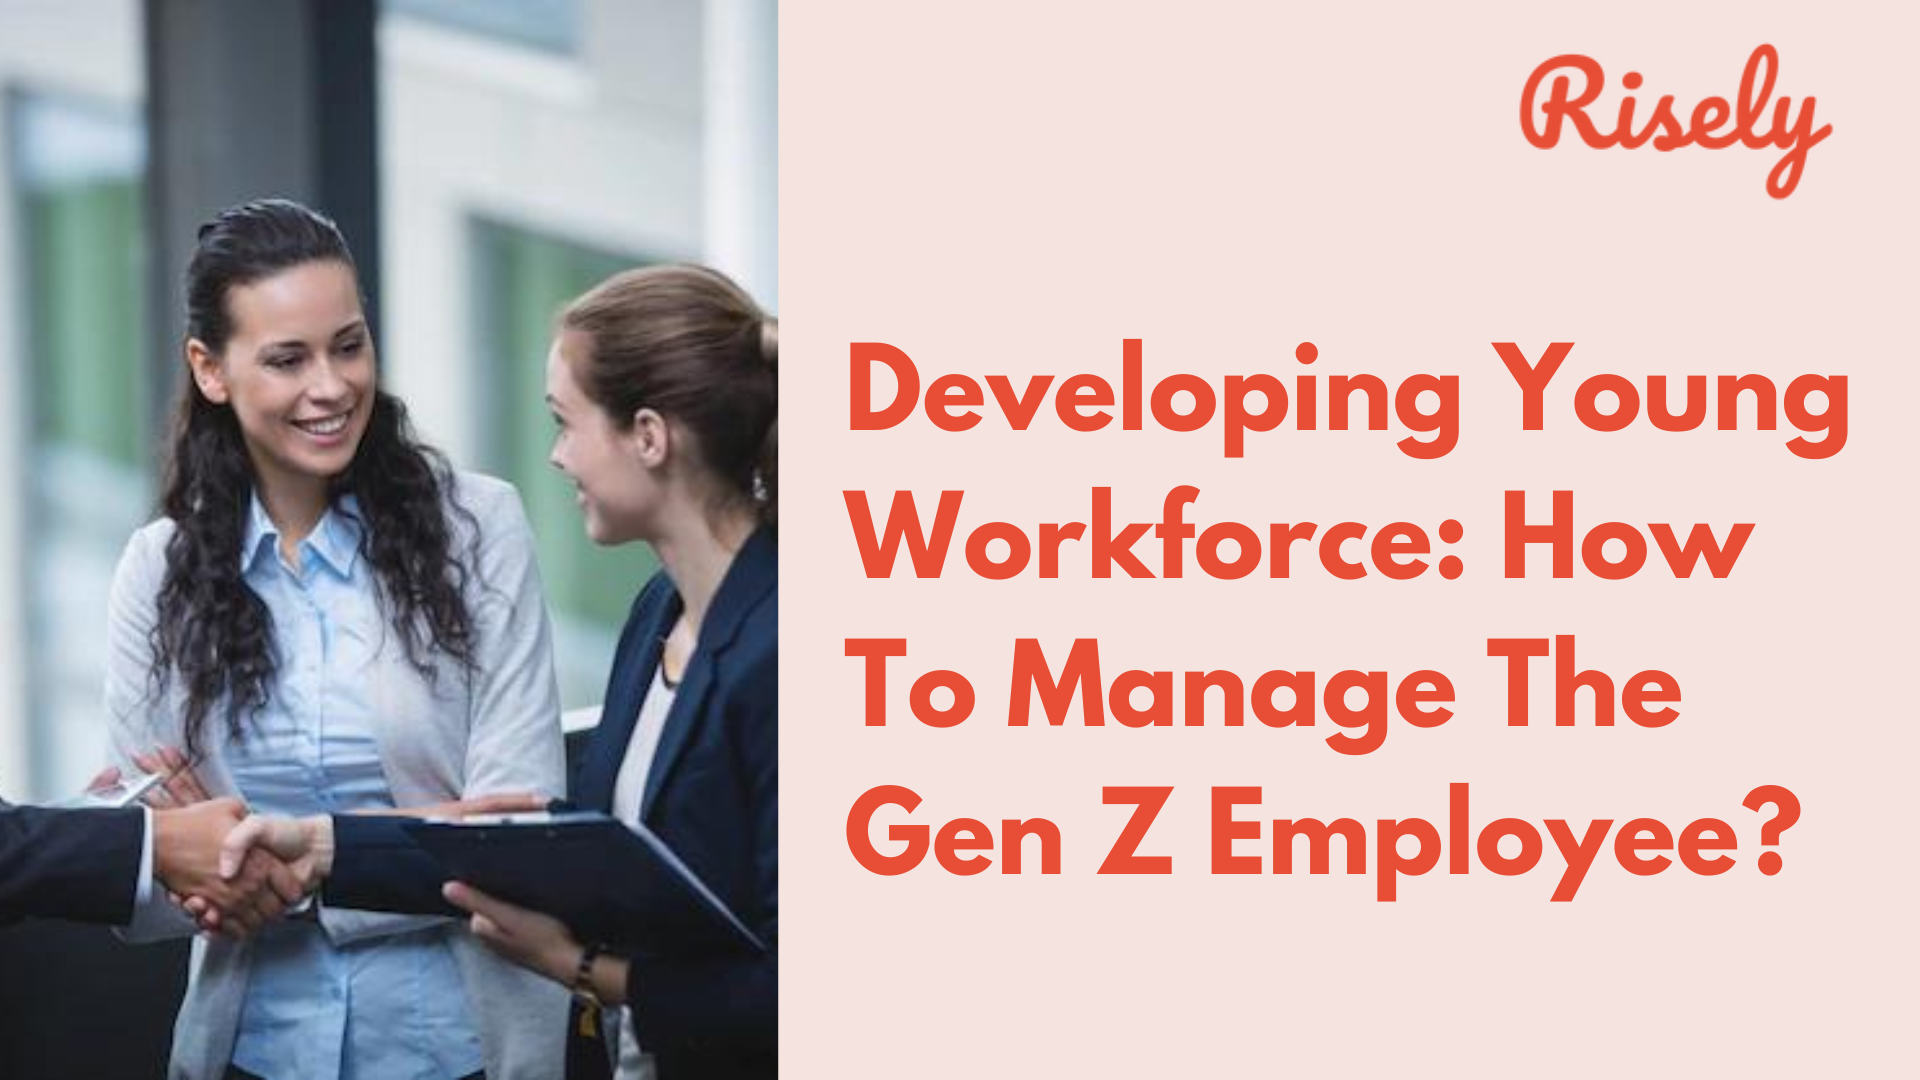 Developing Young Workforce: How To Manage The Gen Z Employee